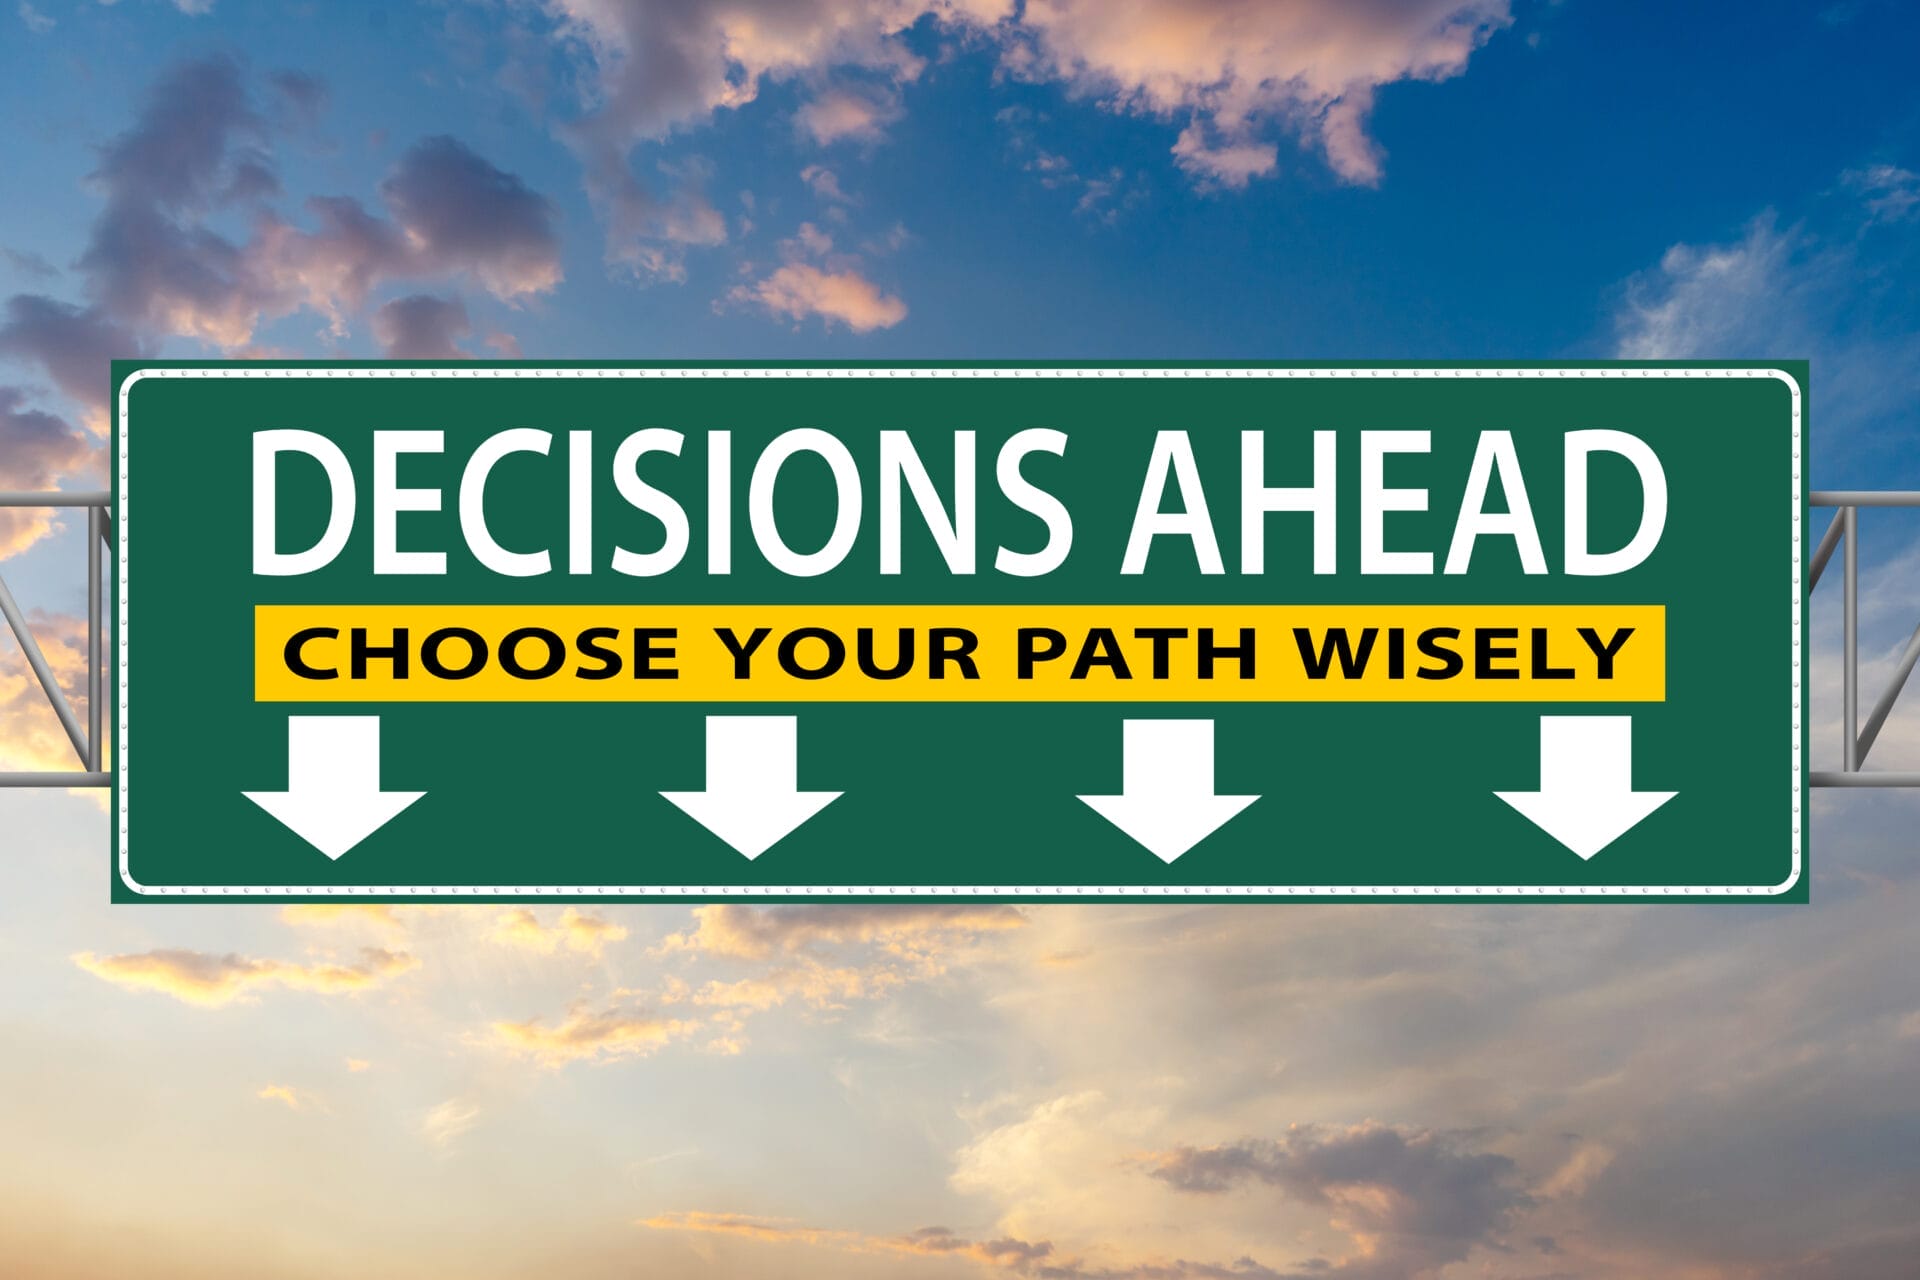 Choose Your Path Wisely